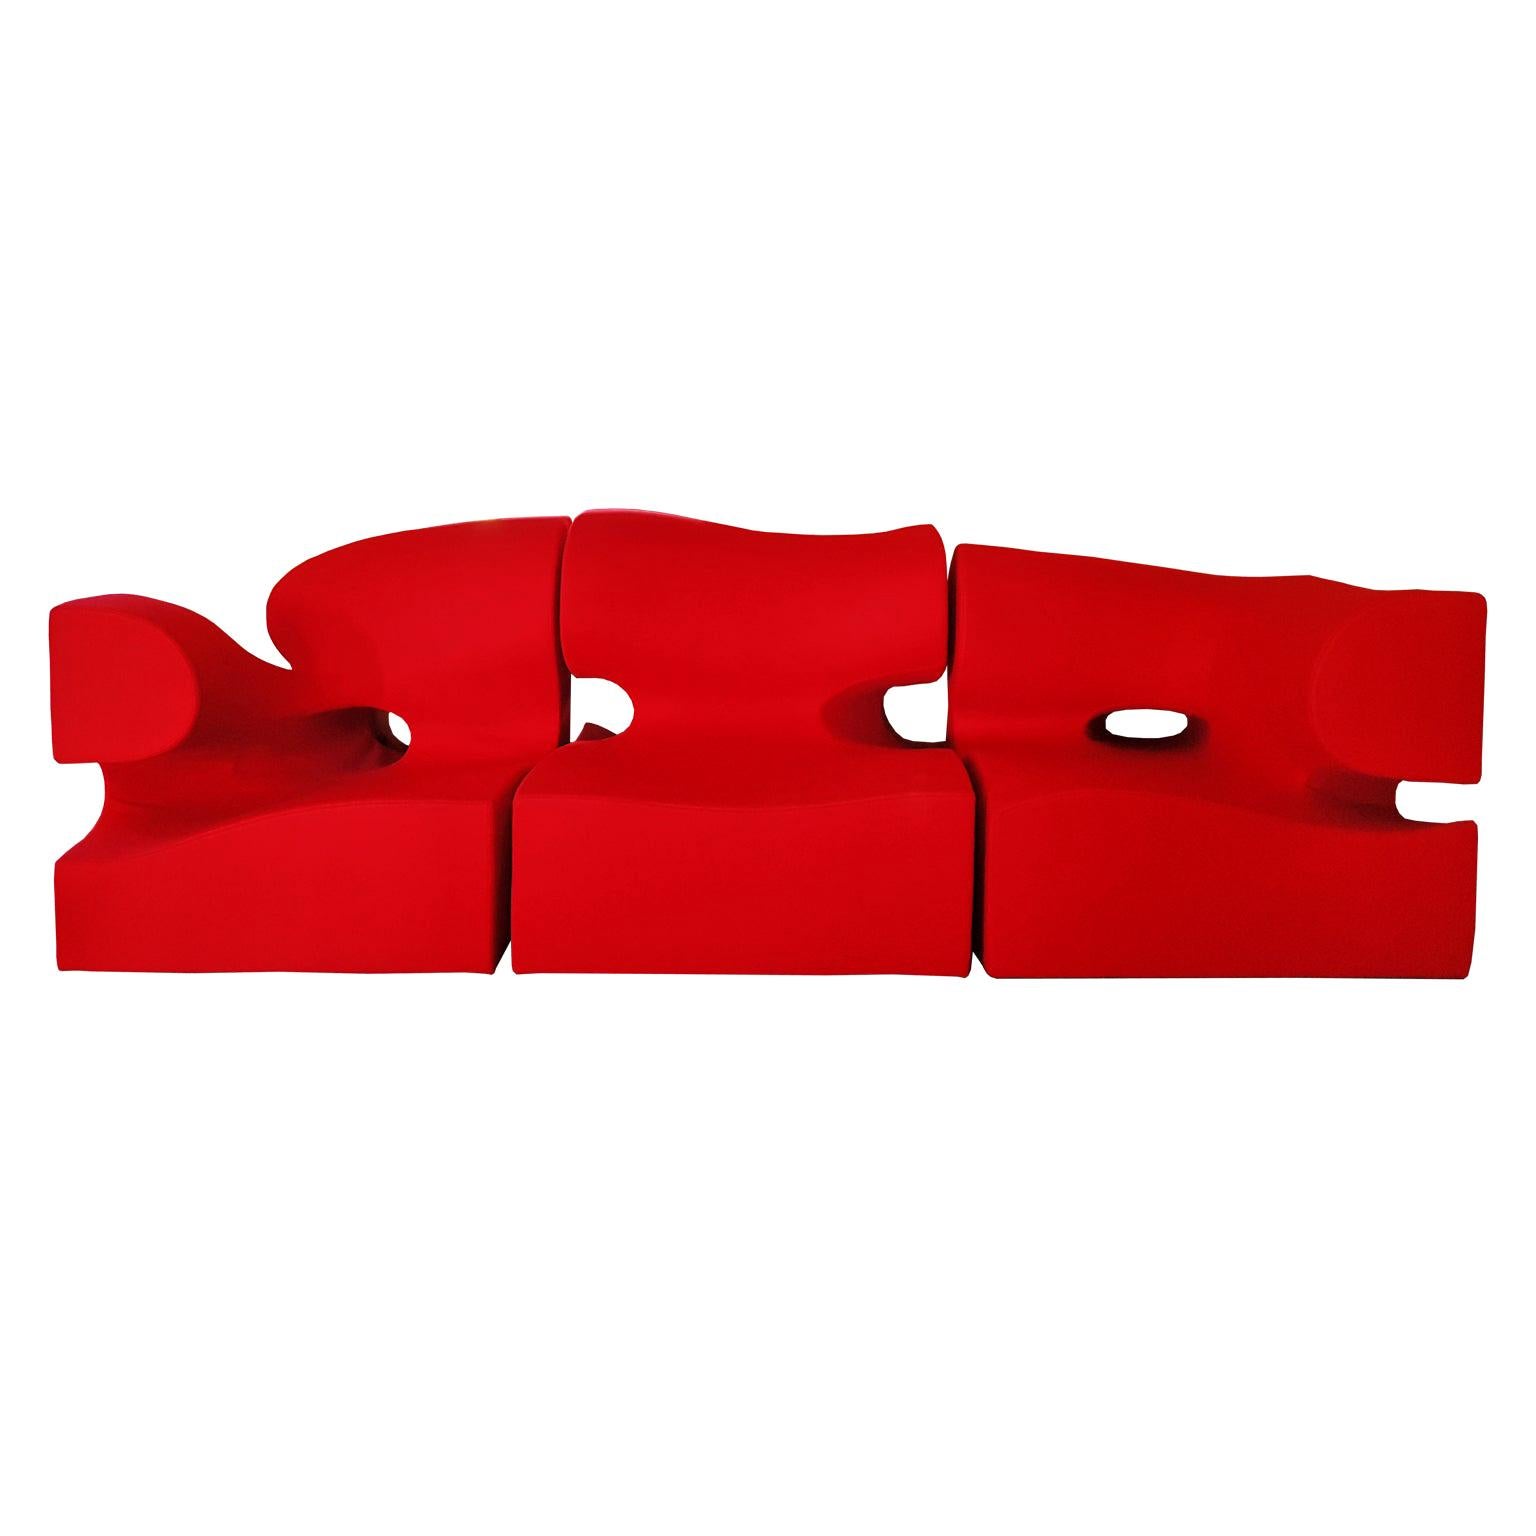 Contemporary Italian Moroso Modular Sofa with Red Wool Upholstery by Ron Arad For Sale